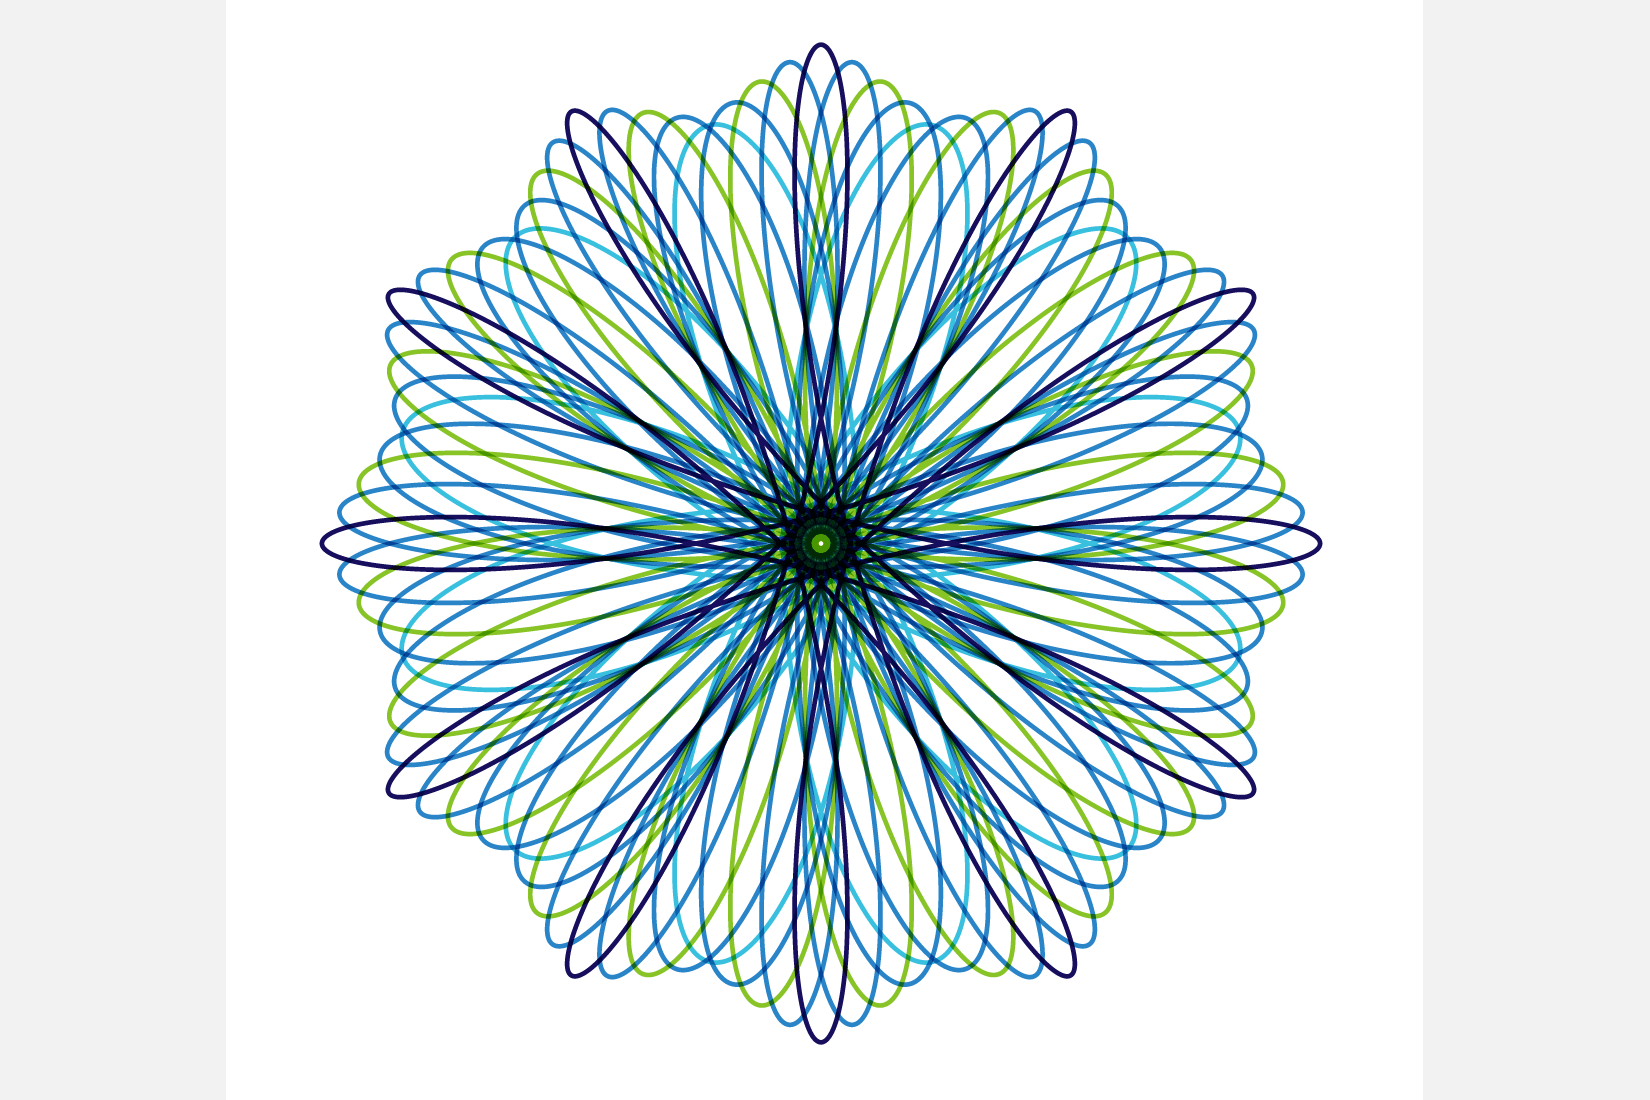 A spirograph from my 'Visualizing the Beauty of Math' presentation